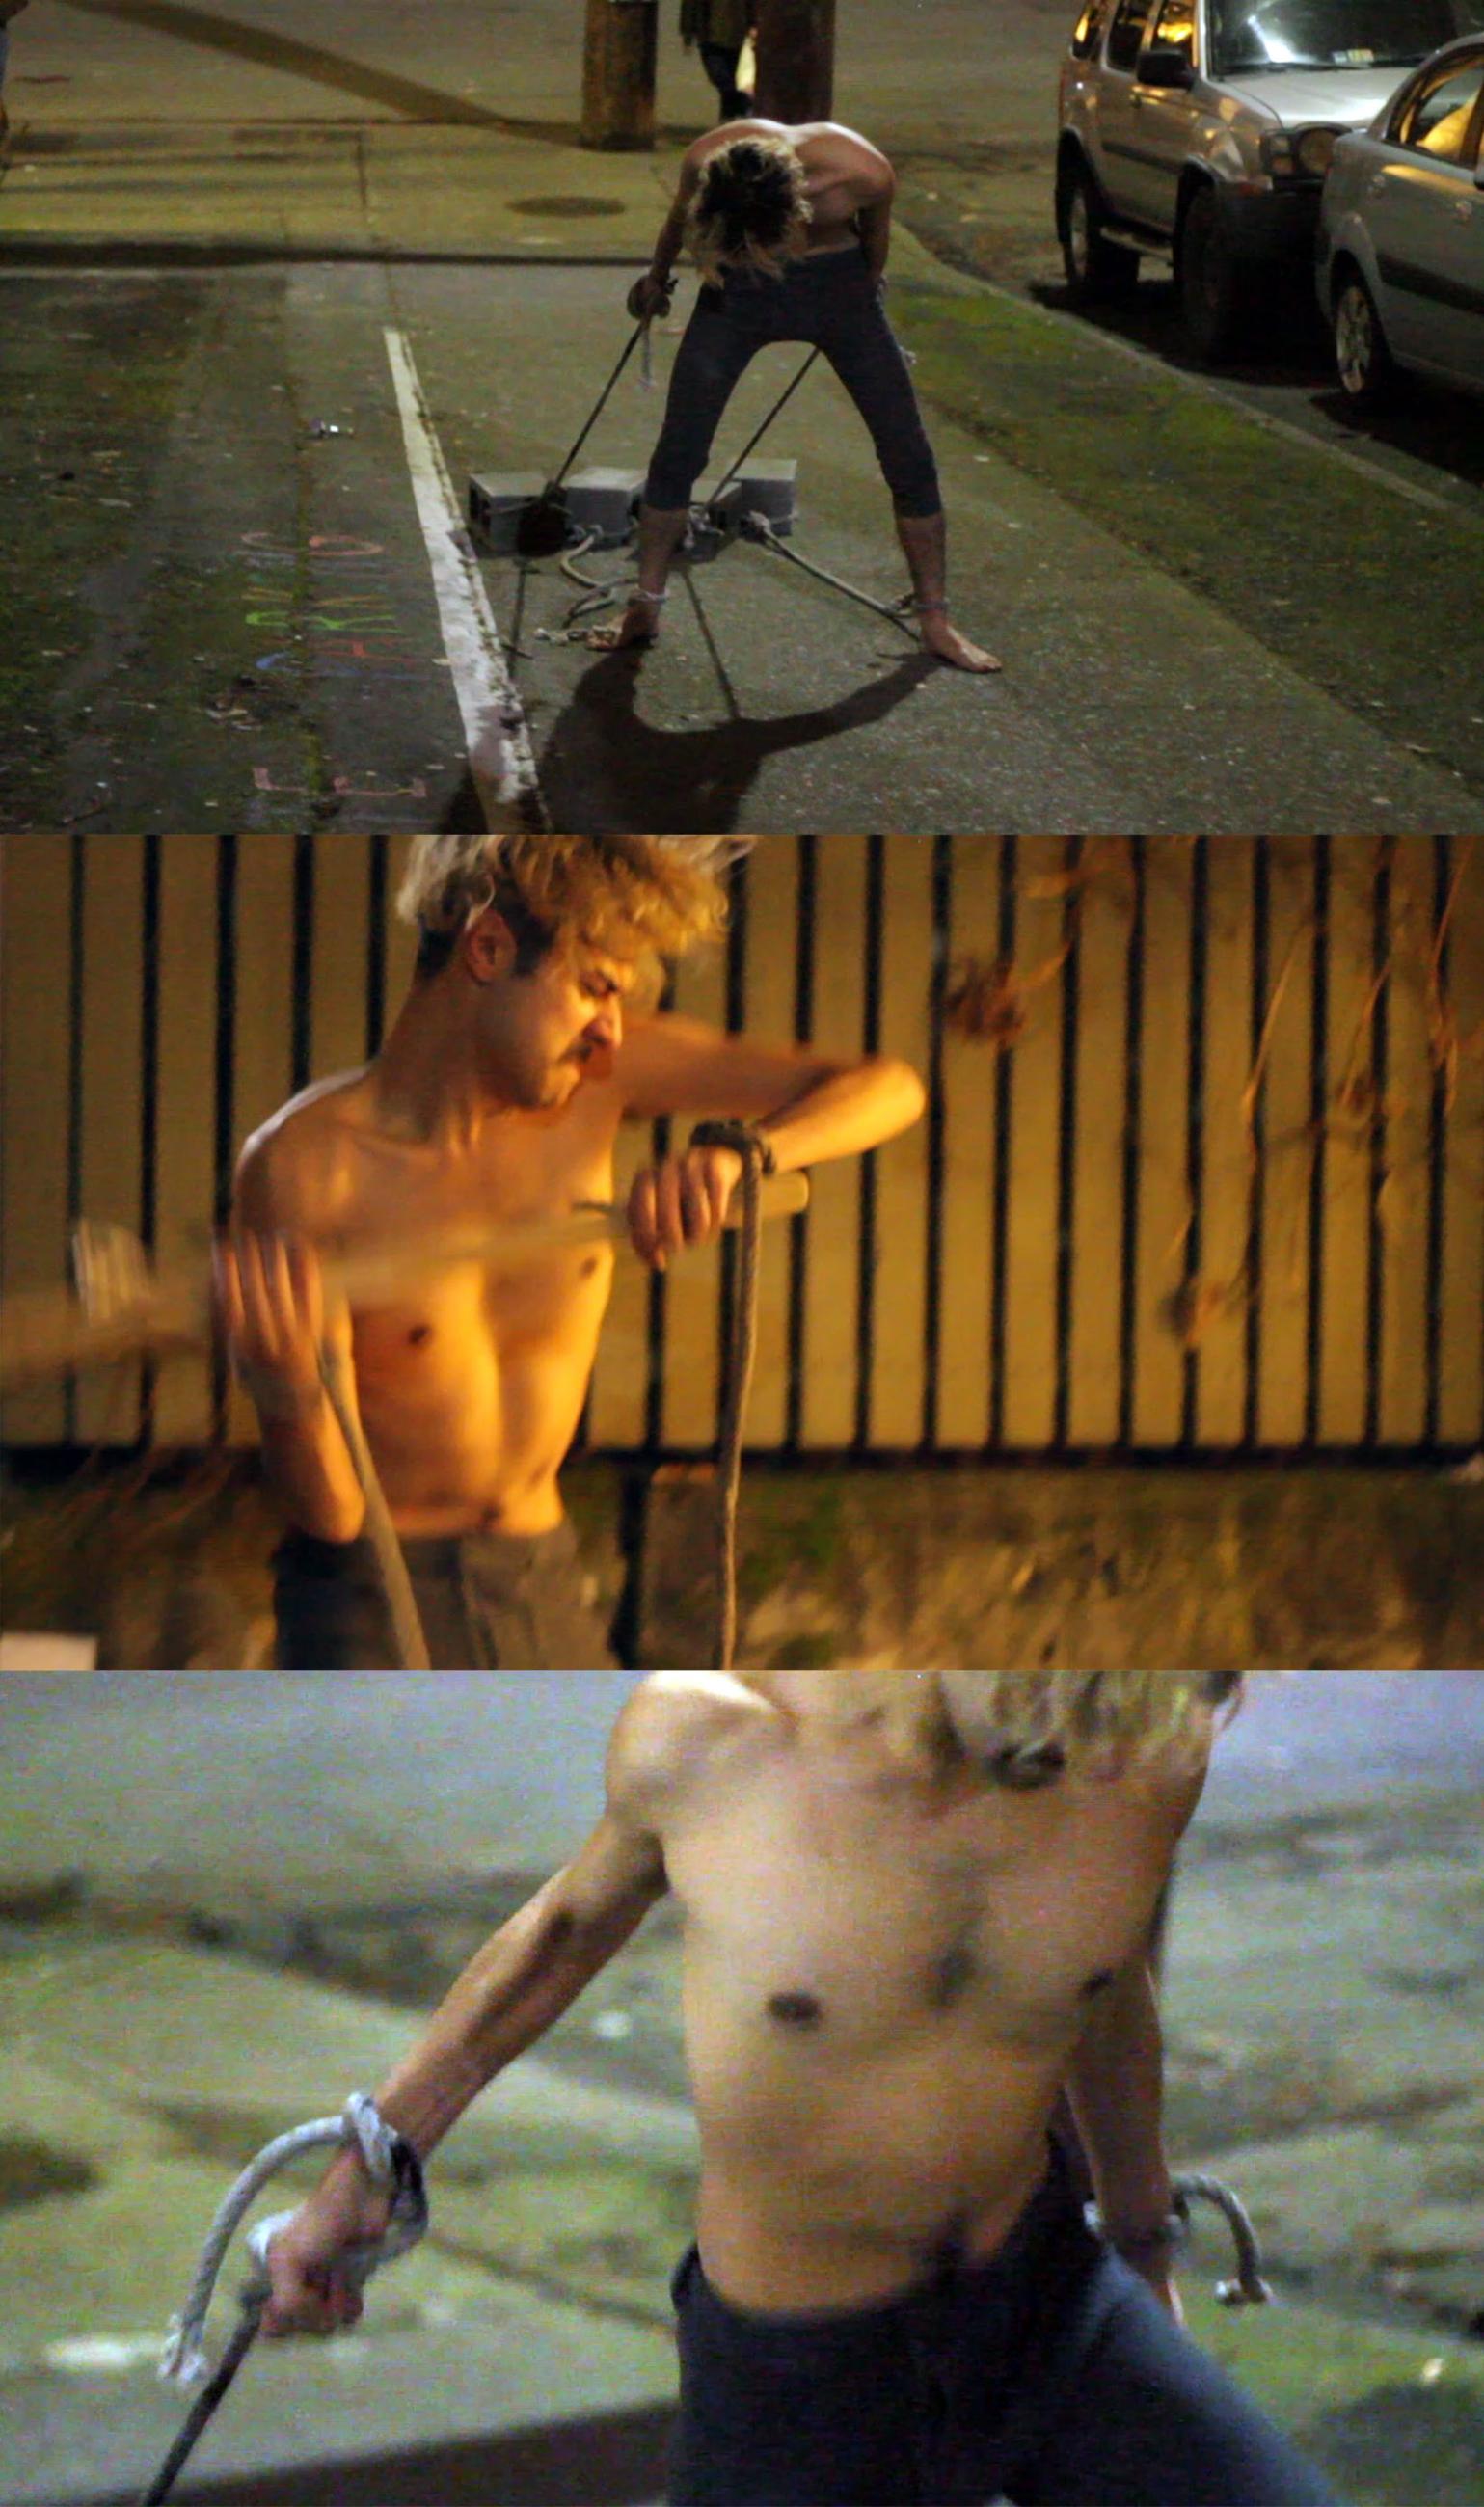 Three images from a video of a shirtless person dragging blocks